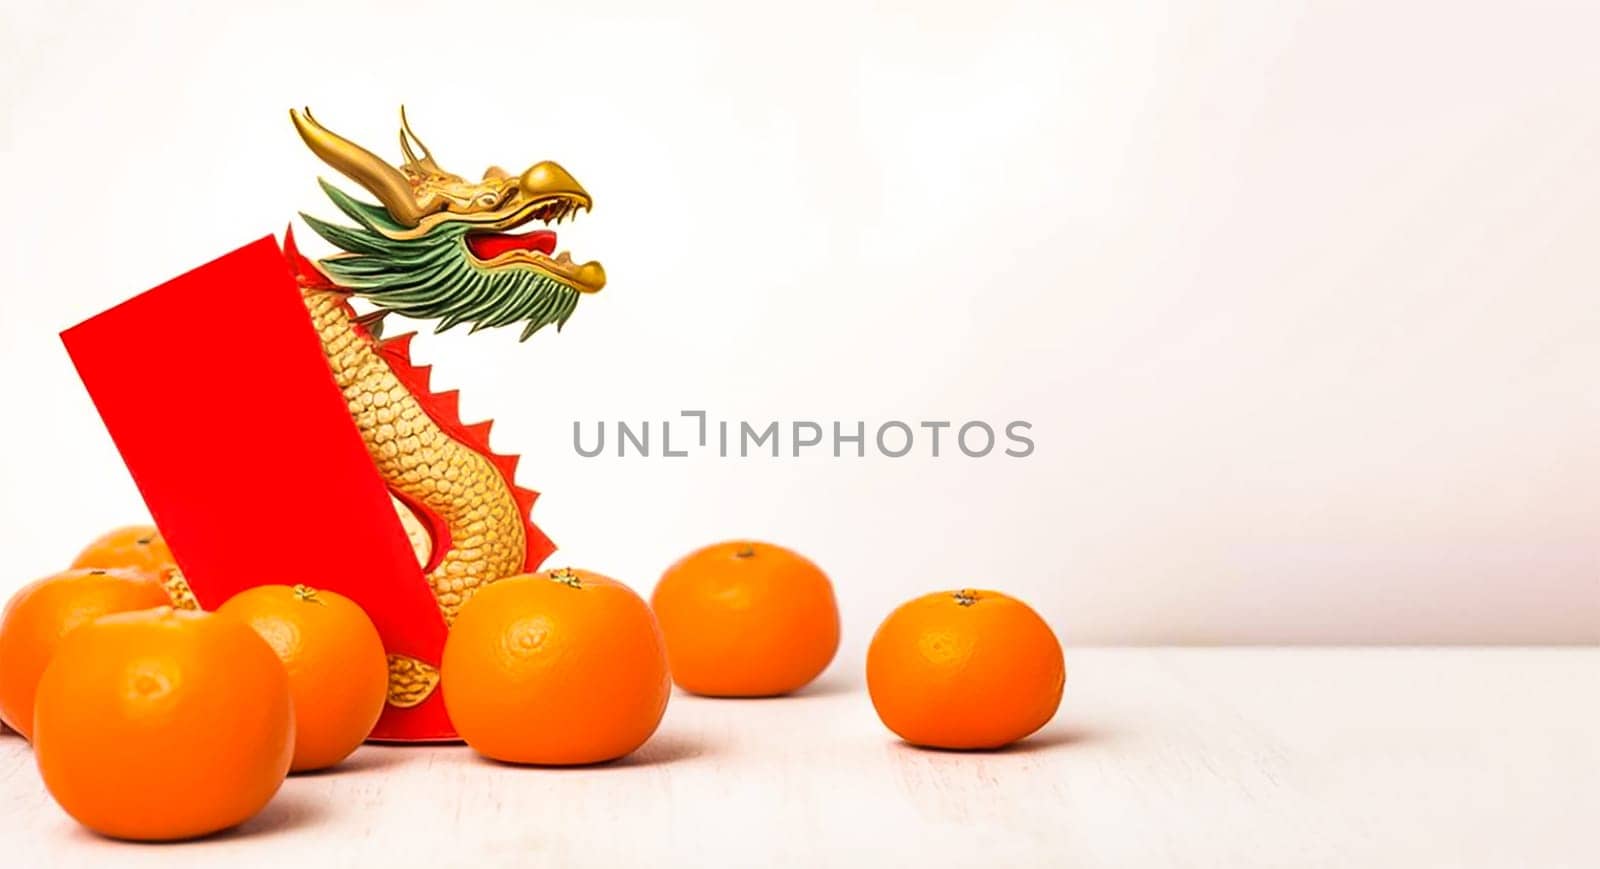 hongbao Chinese money envelope, tangerines and a dragon on a light background, place for text on the right, banner.